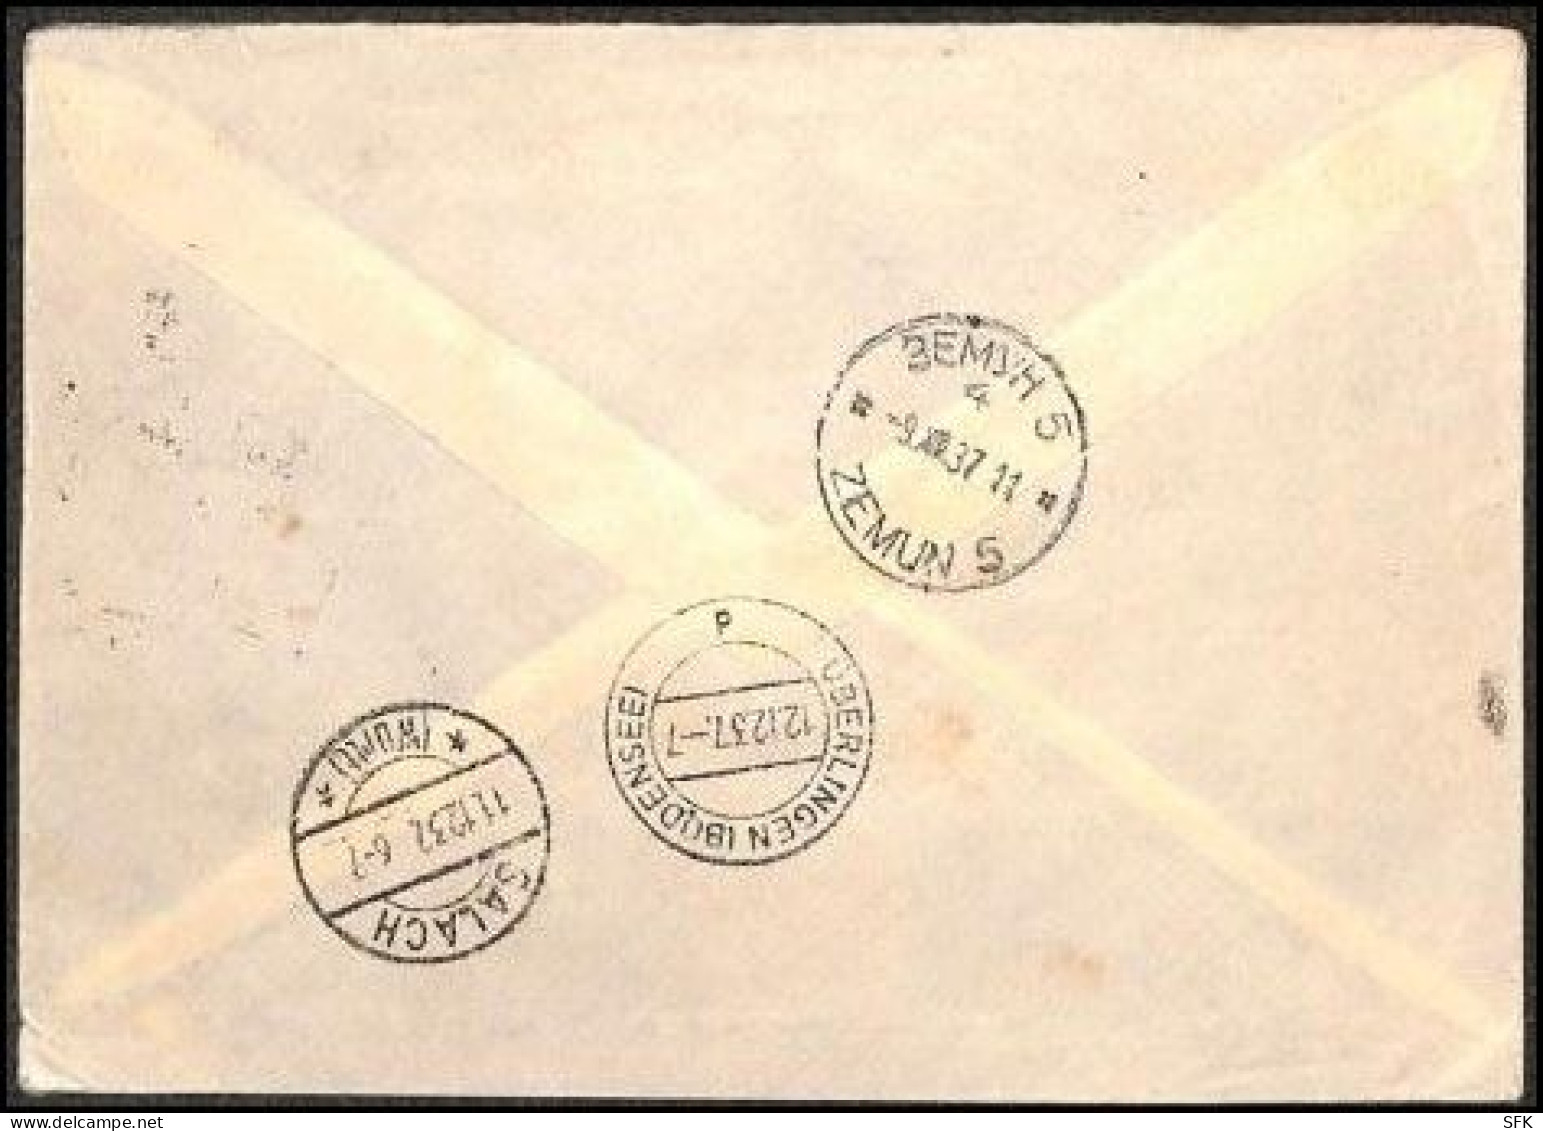 1937 Airmail Letter From Belgrade Airport Zemun 5 To Wirnterberg Sent By Lufthansa With Appropriate Franking, VF - Poste Aérienne